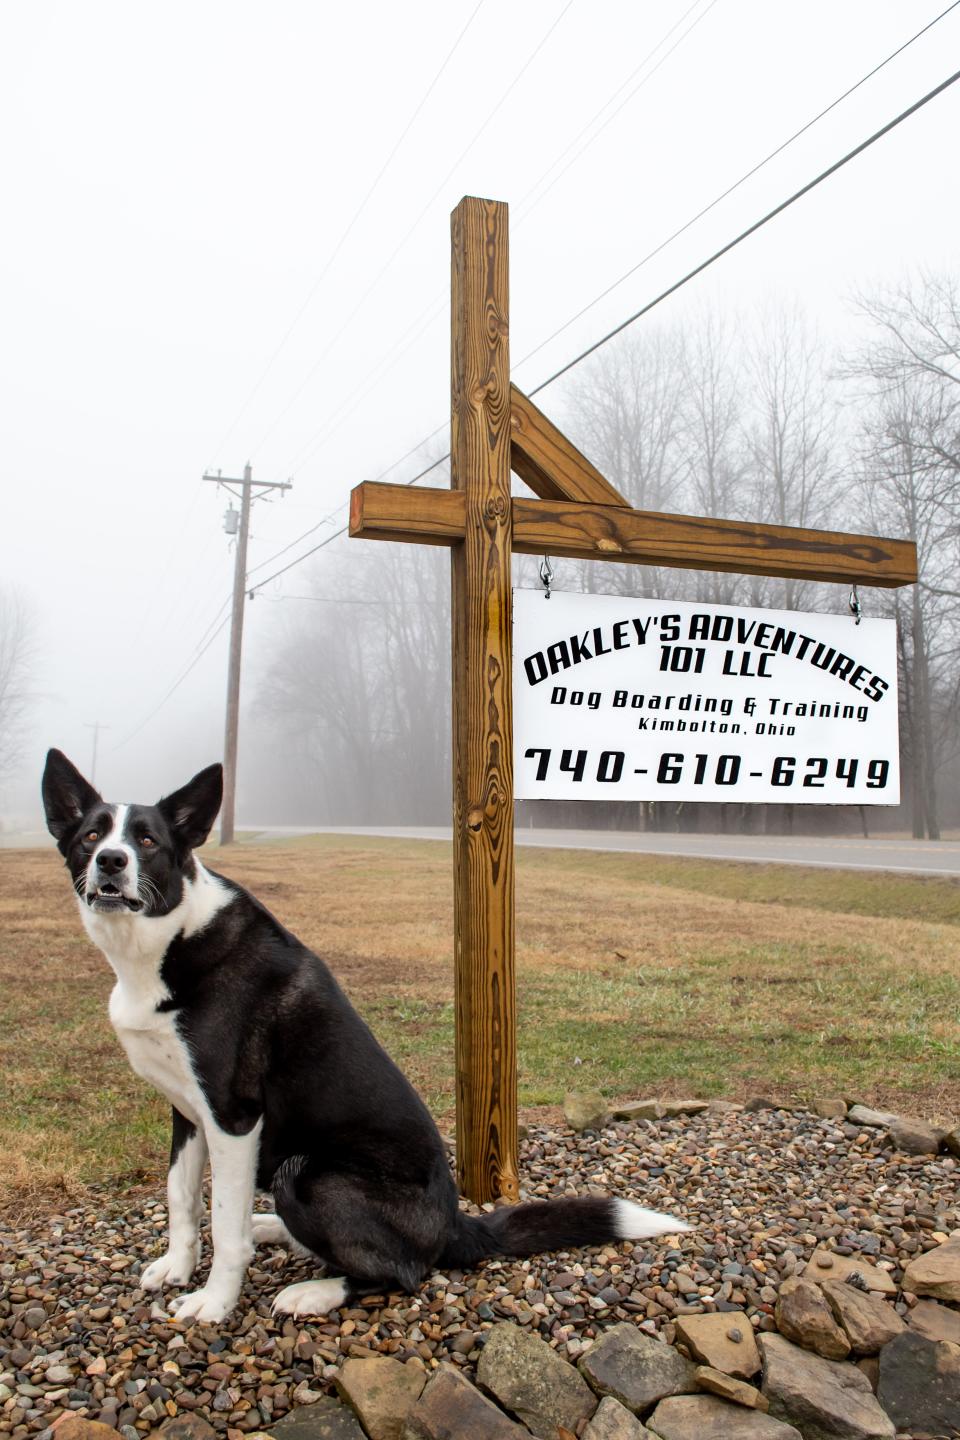 Oakley's Adventures 101 LLC, based out of Kimbolton, along with the business' namesake, Oakley. The facility offers boarding and training, and owner Katrina Ledwell travels to teach group and private sessions.